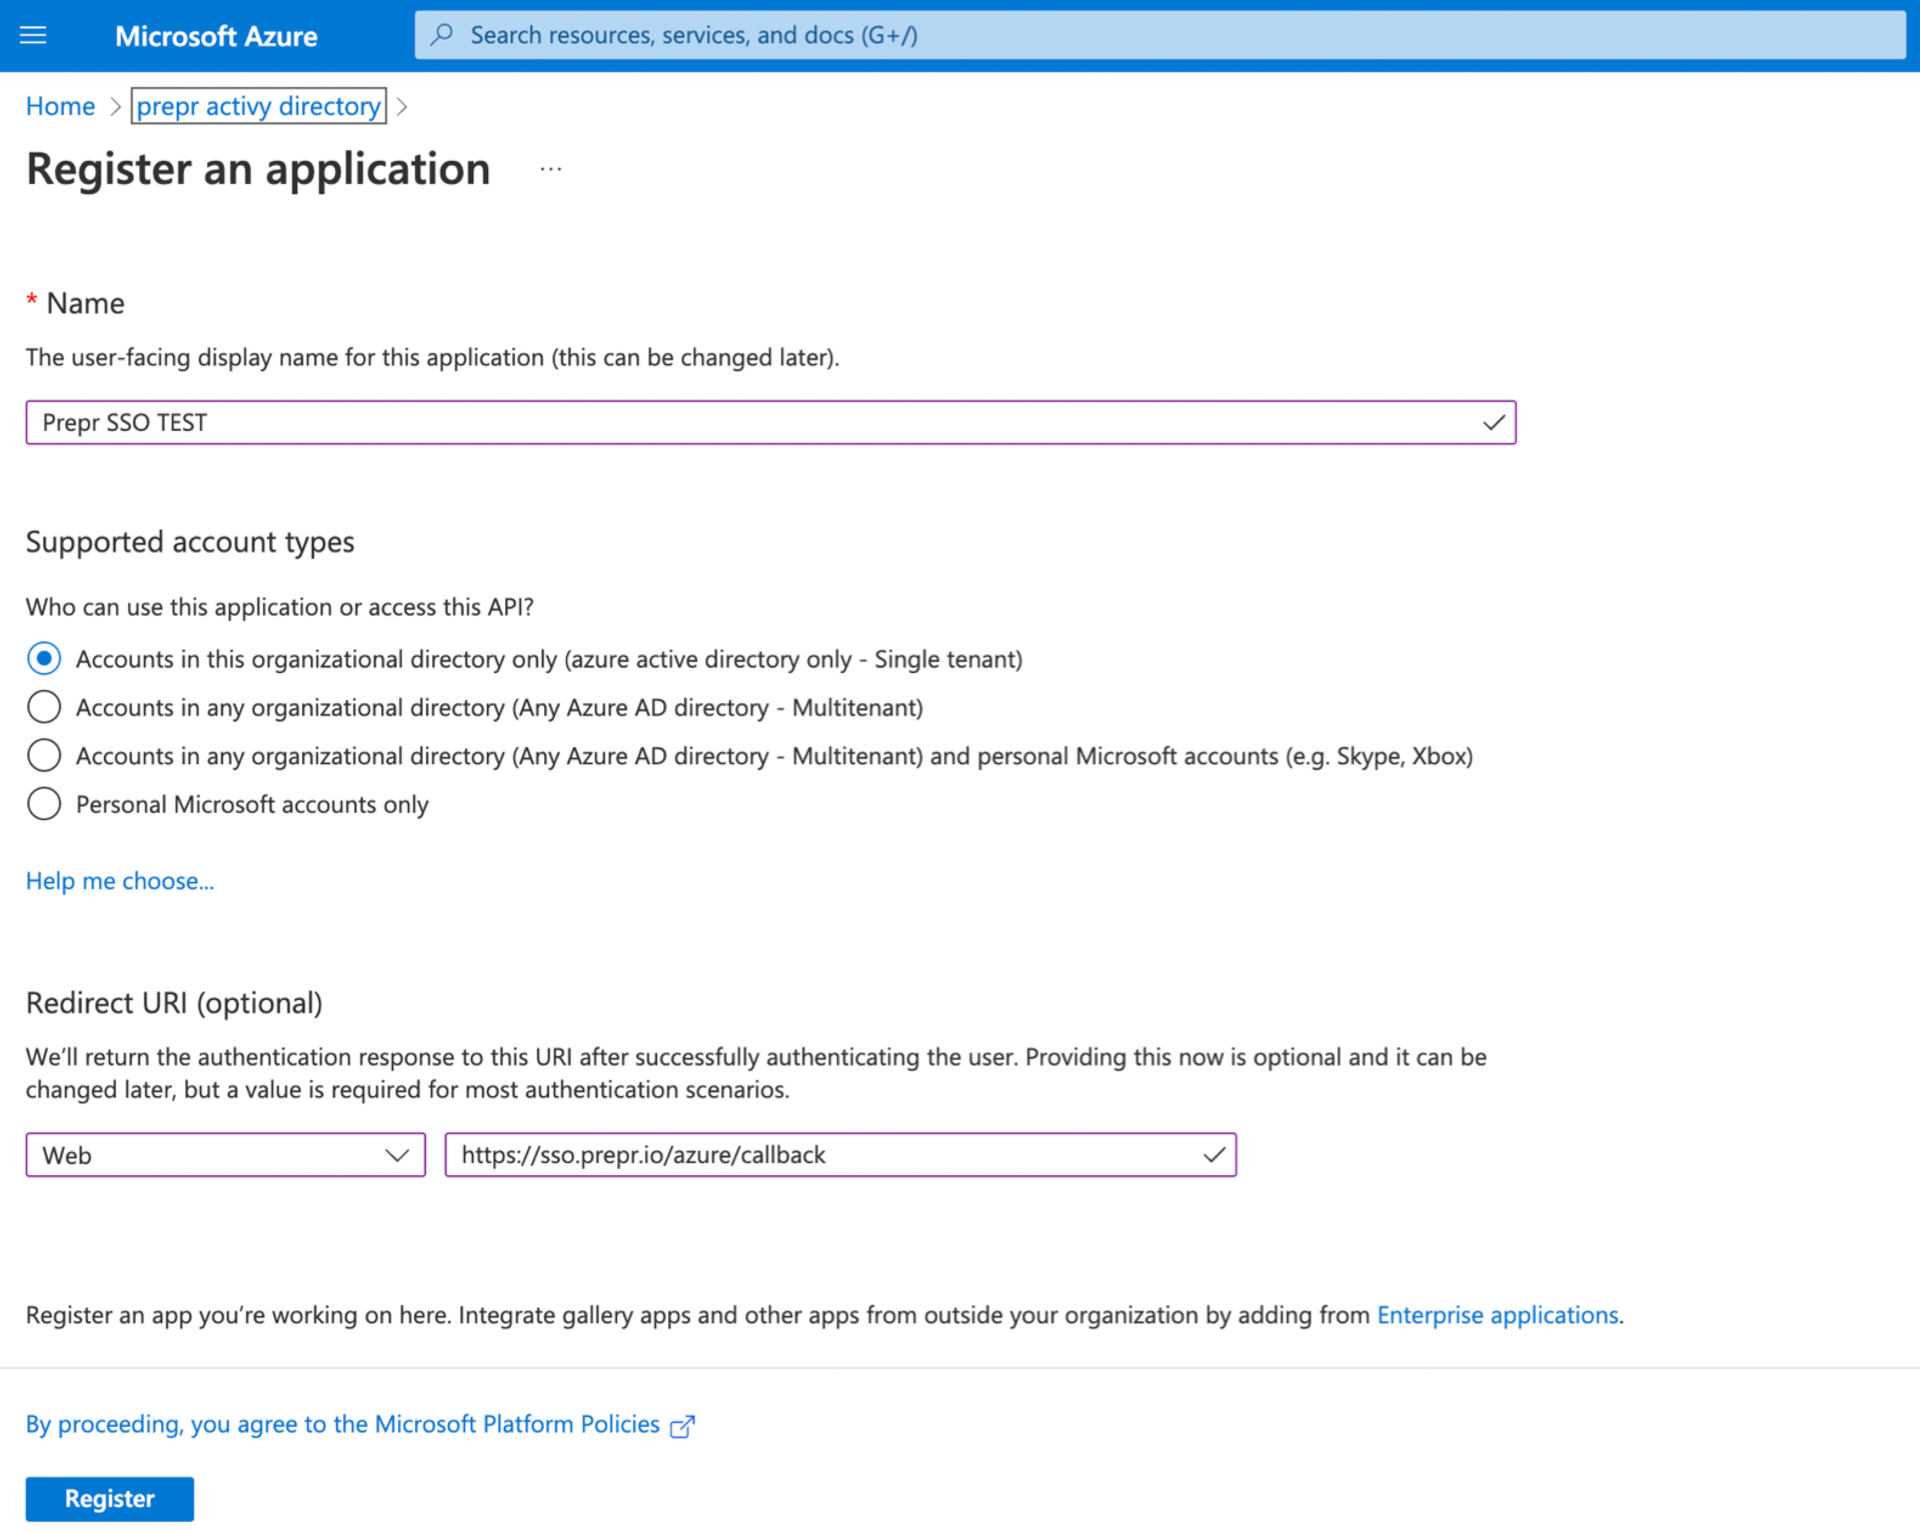 Register your app with Azure AD